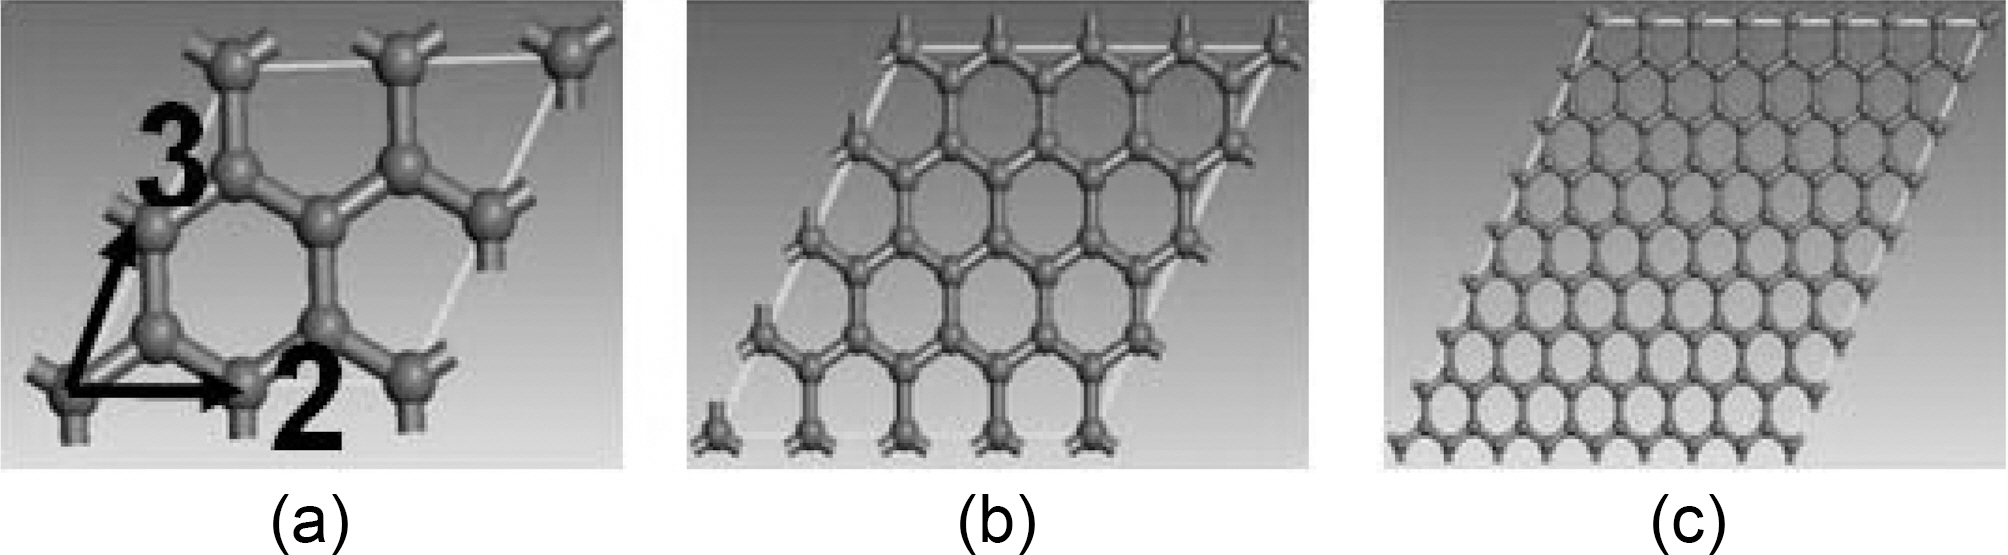 Graphene atomic supercell (a) graphene two supercells (b) graphene four supercells and (c) graphene eight supercells.